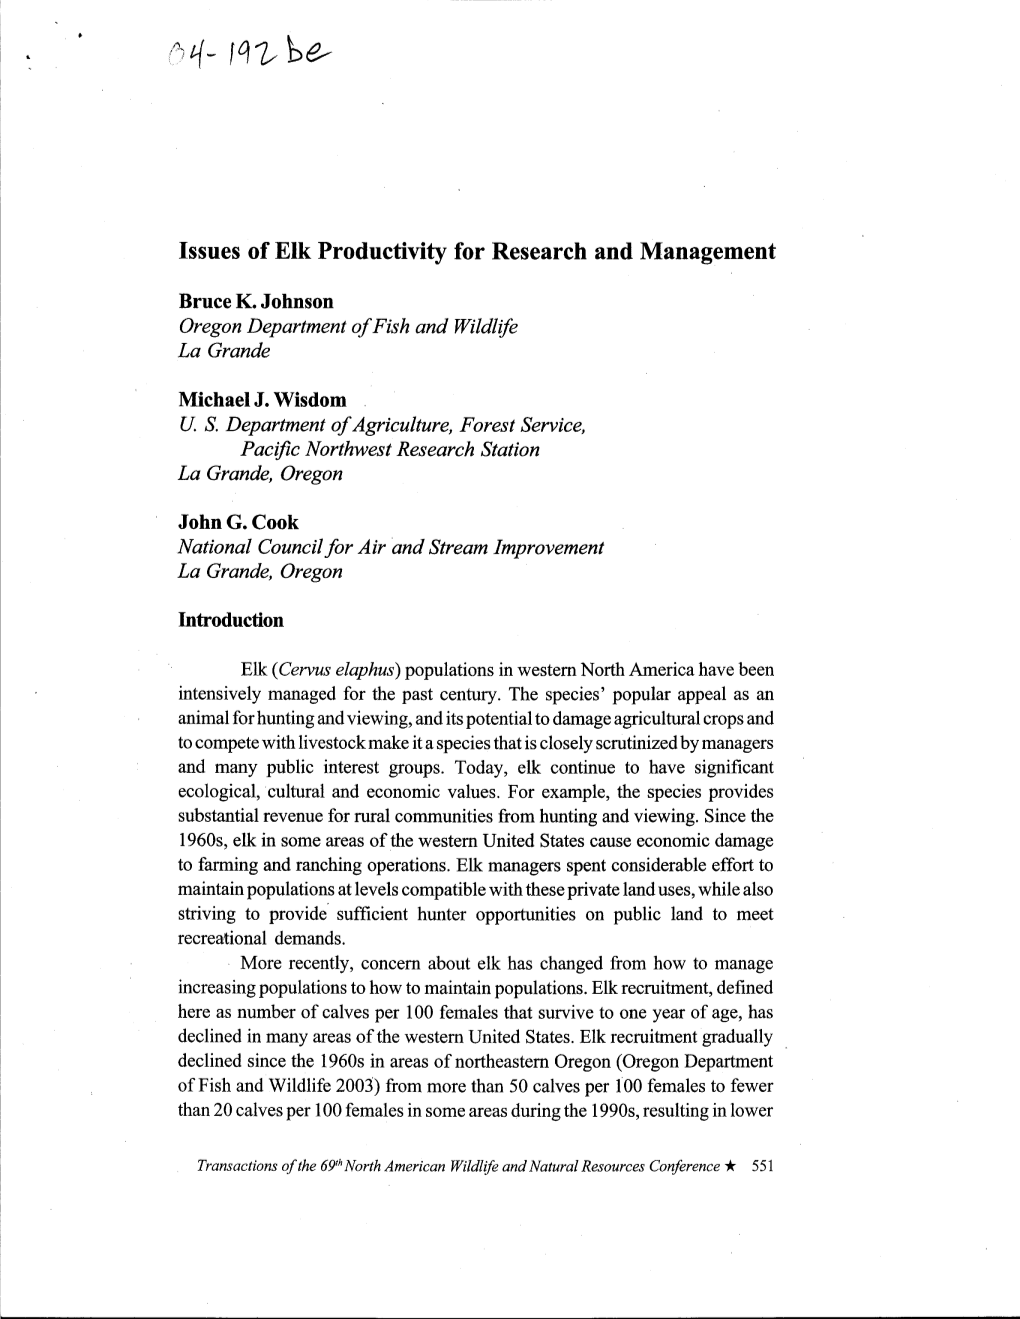 Issues of Elk Productivity for Research and Management